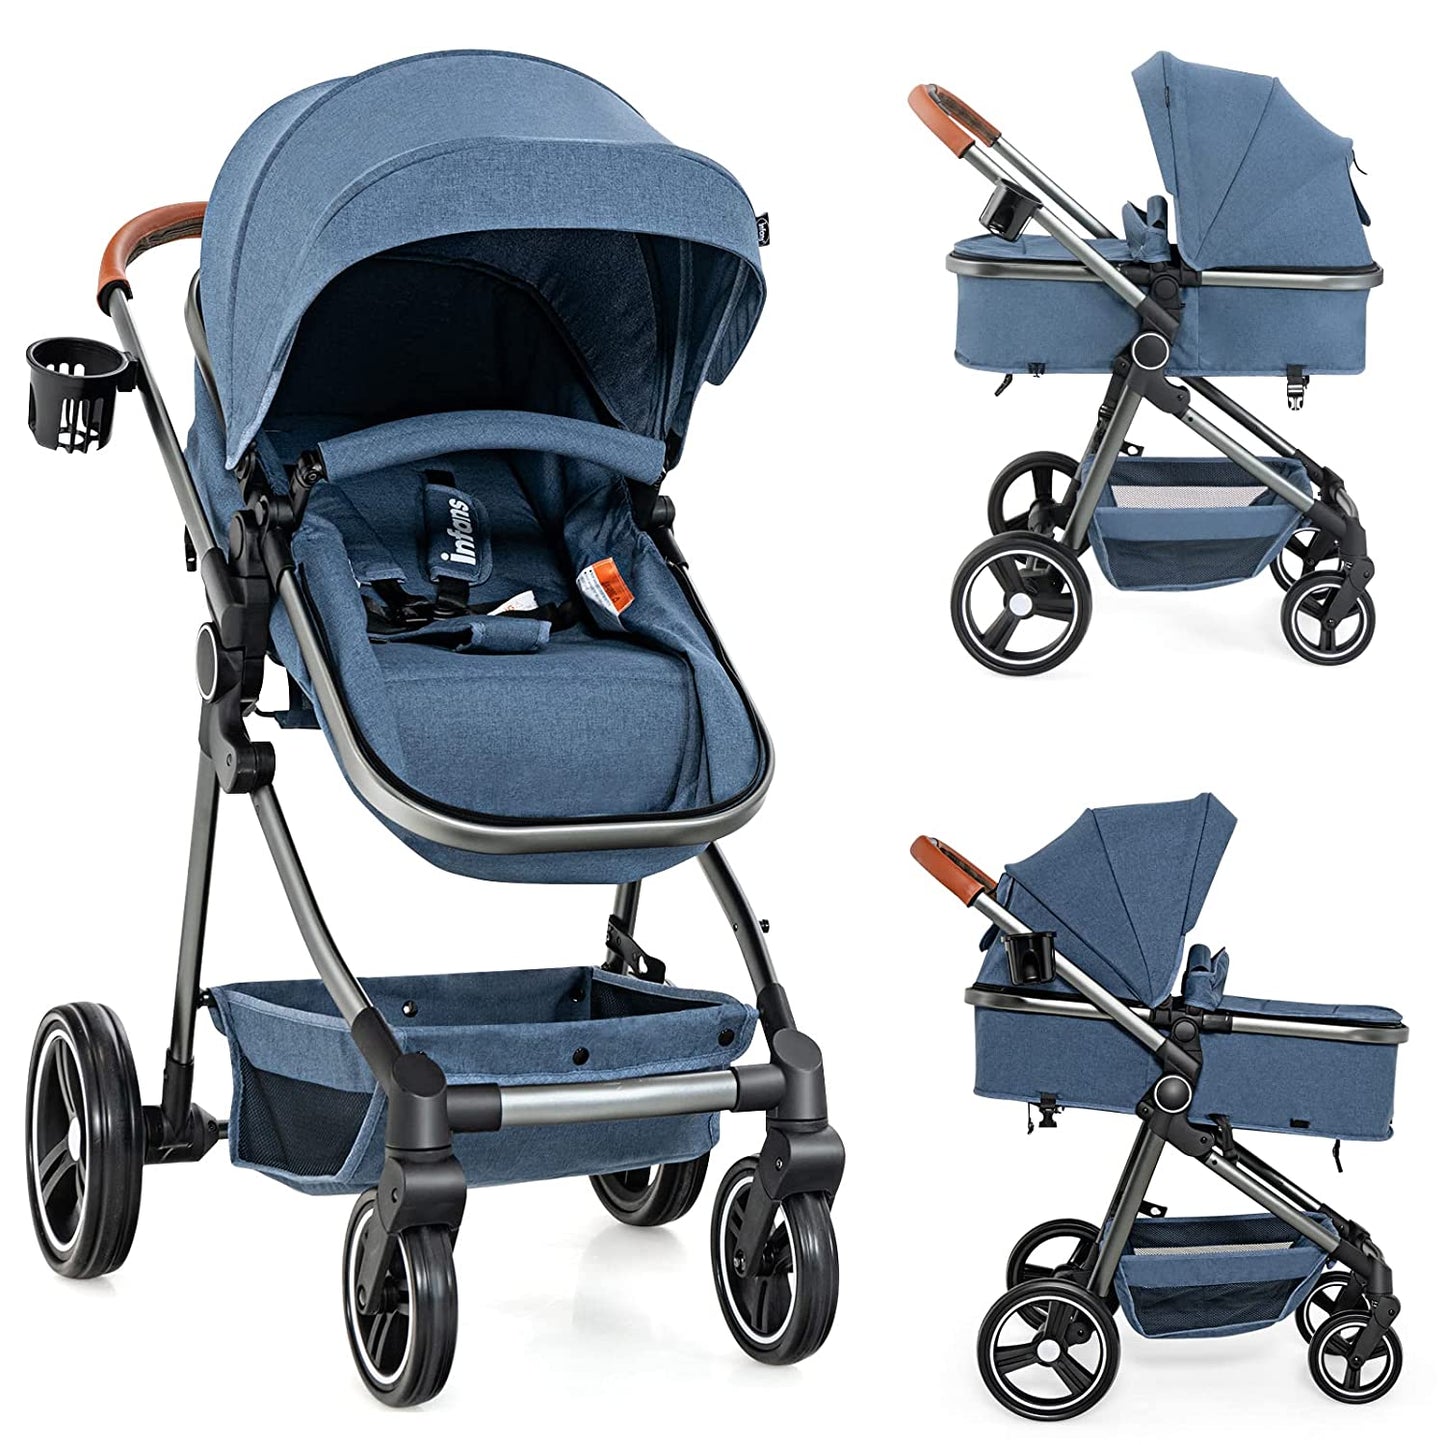 2-in-1 High Landscape Convertible Baby Stroller OLAKIDS